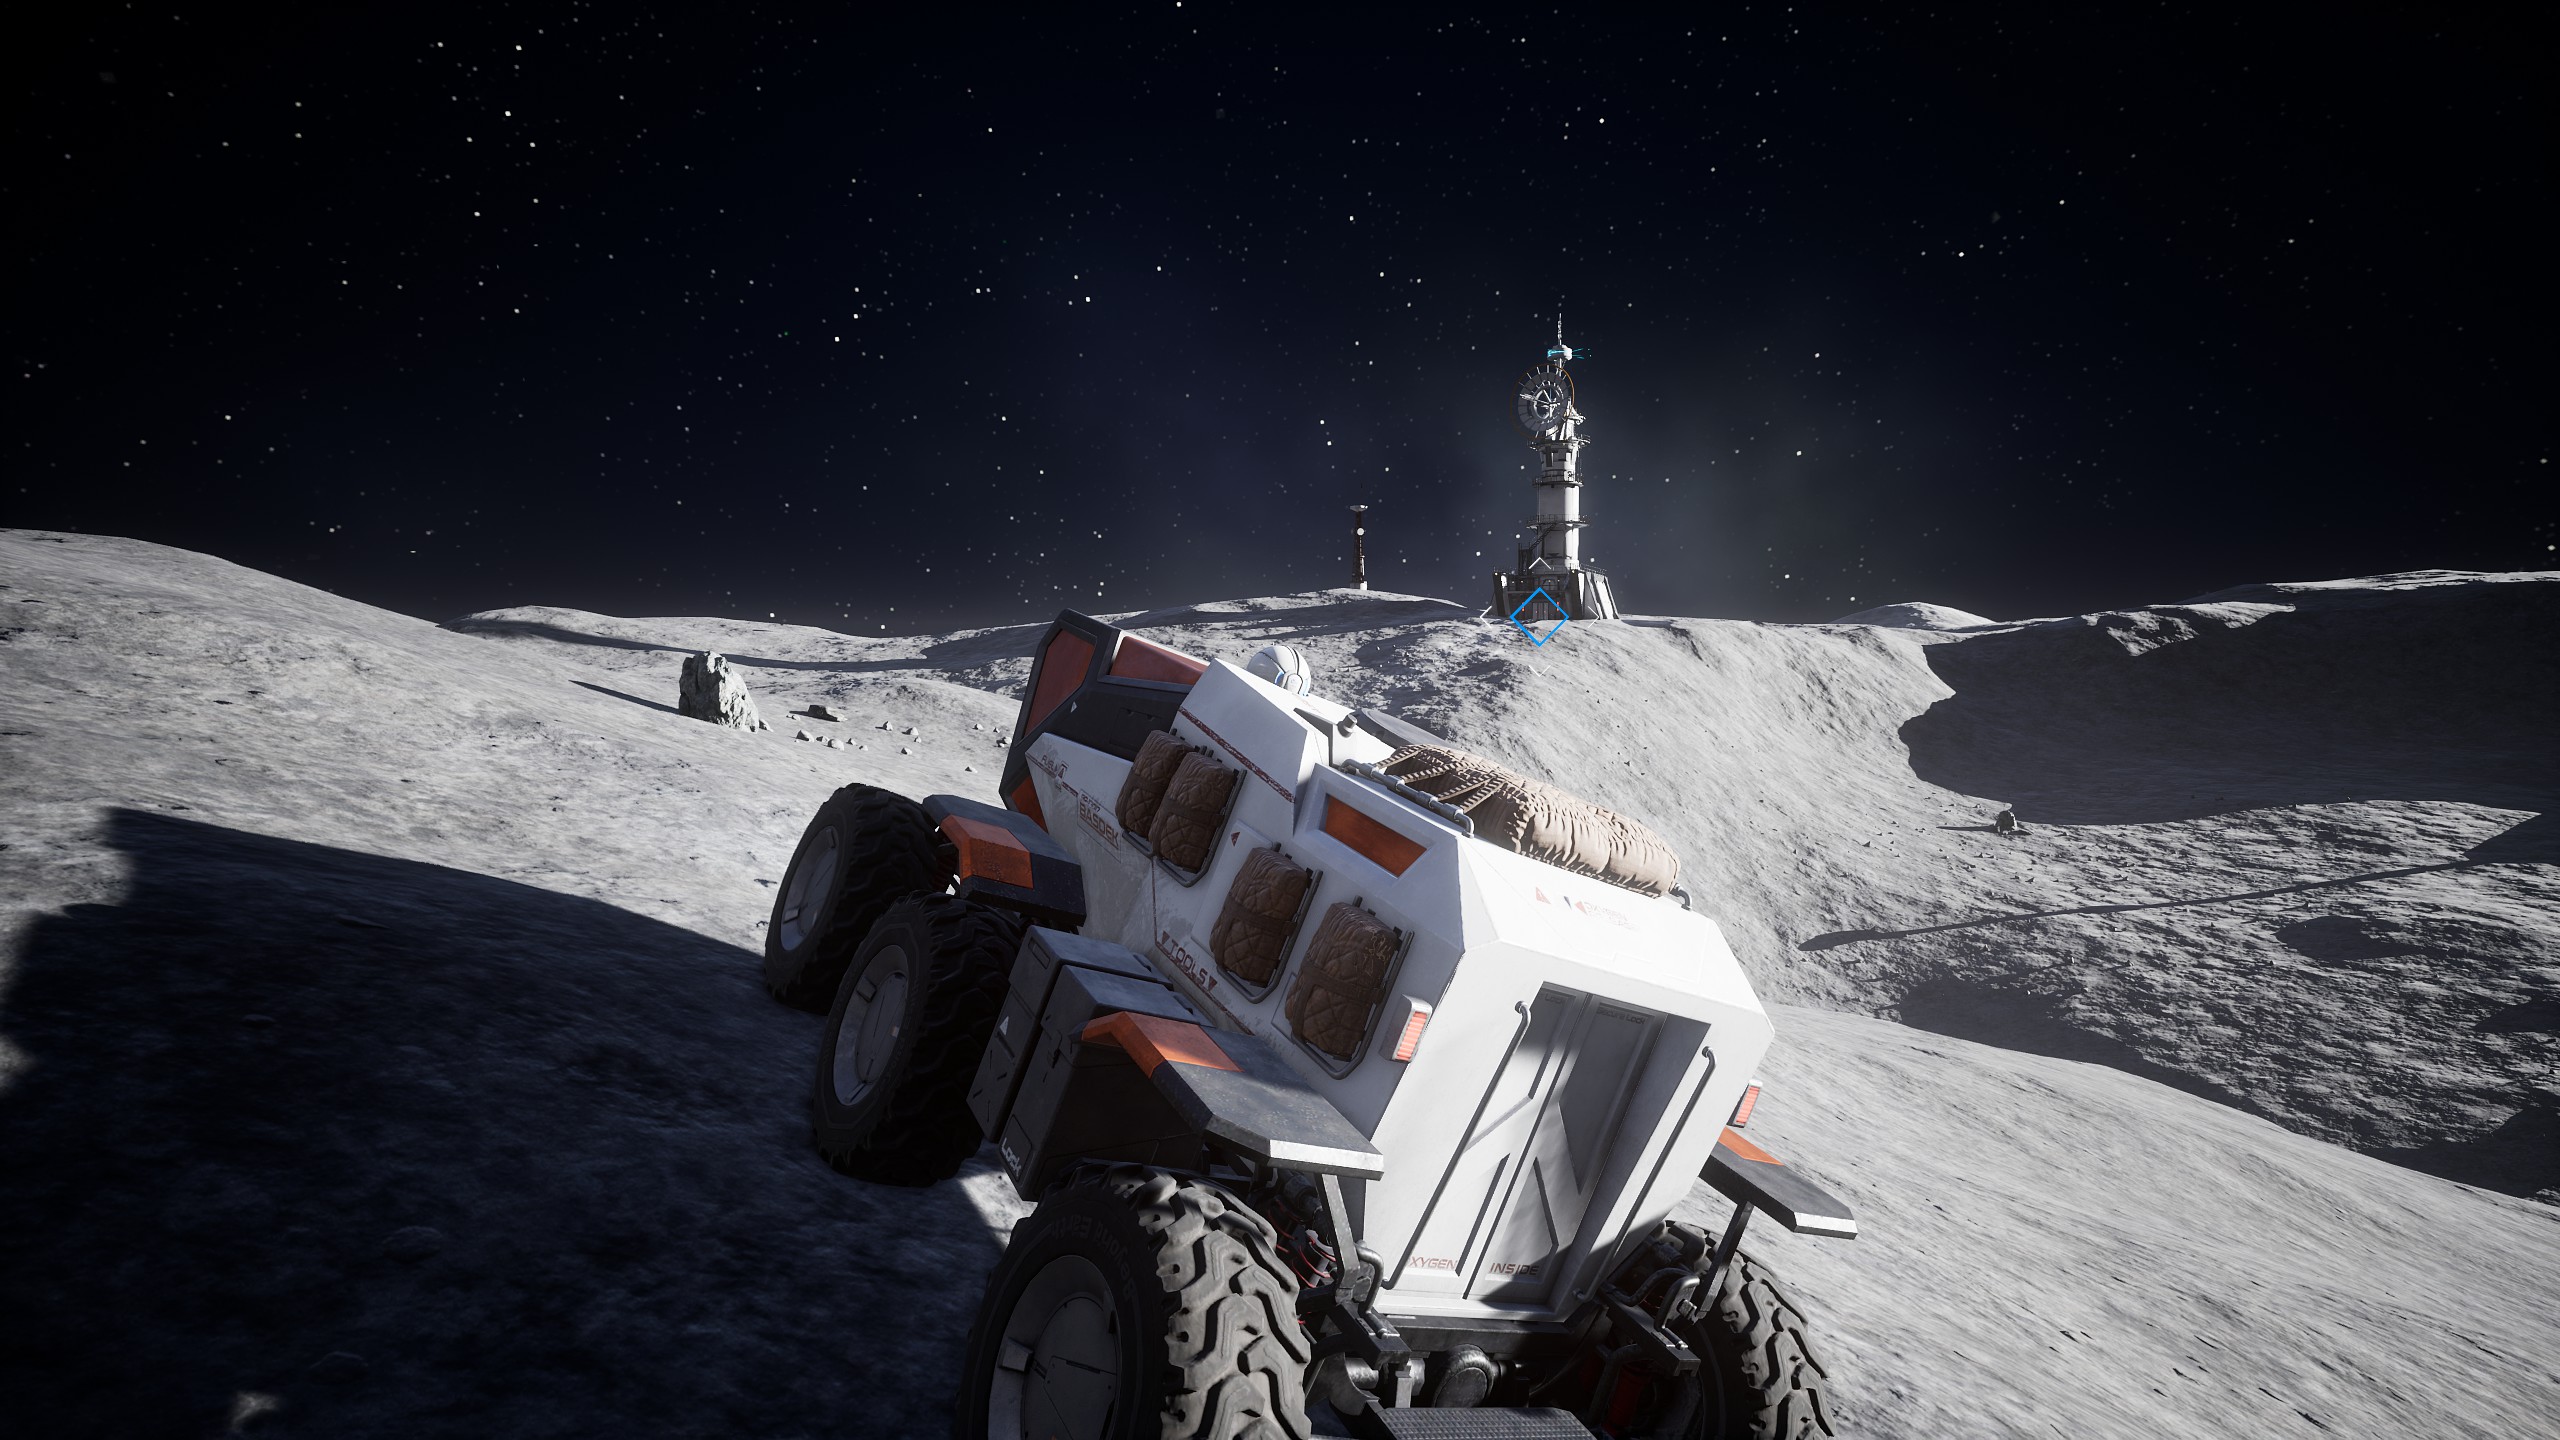 General 2560x1440 video games Deliver Us The Moon space astronaut Lunar Roving Vehicle CGI stars